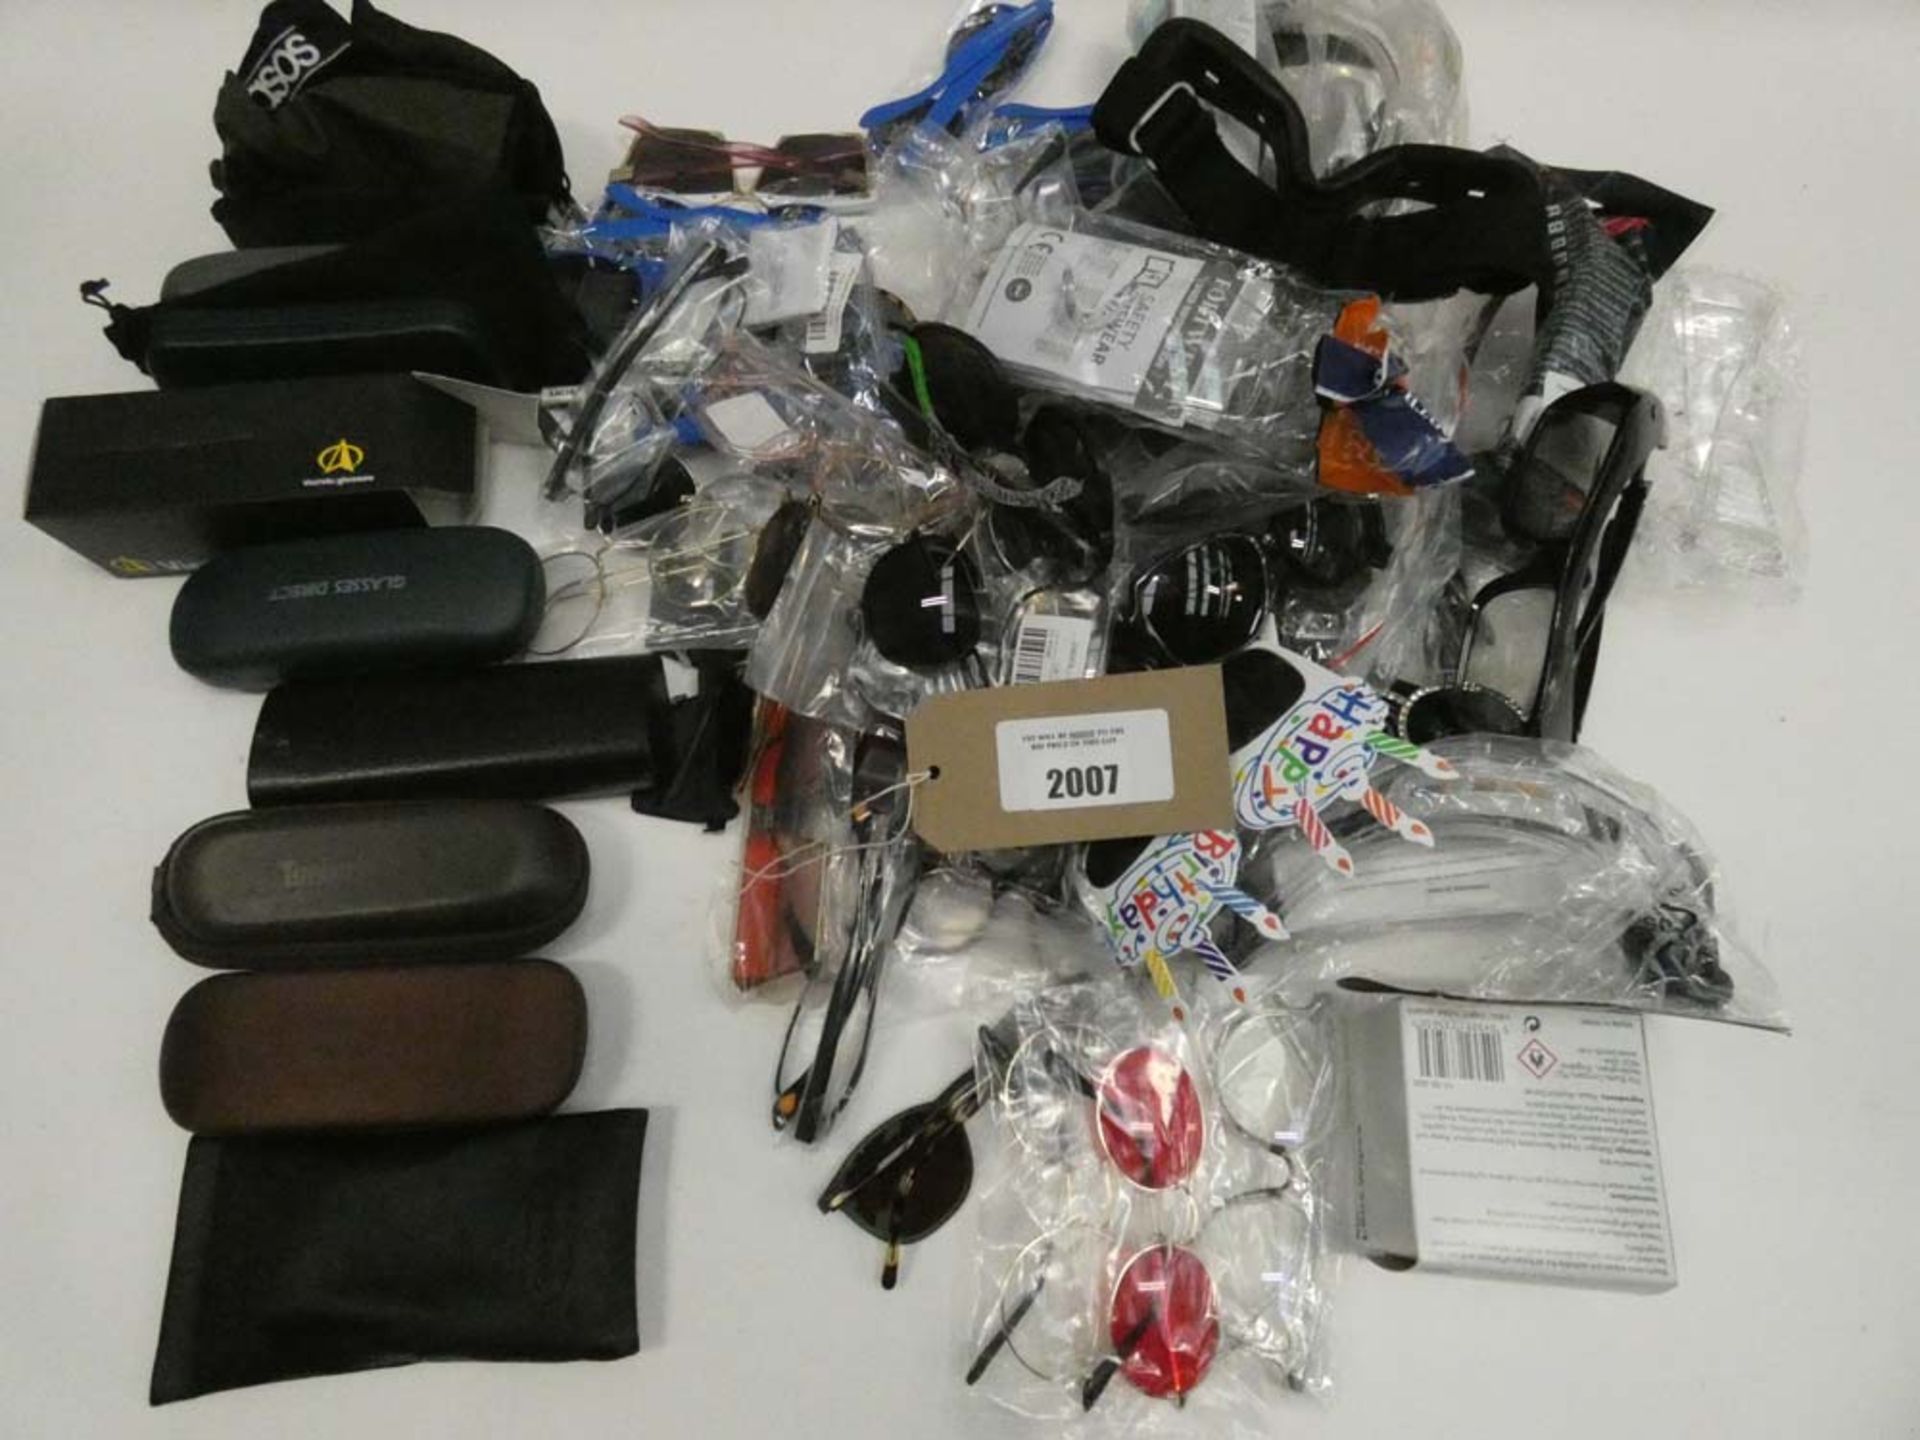 Bag containing various sunglasses, reading glasses and empty cases